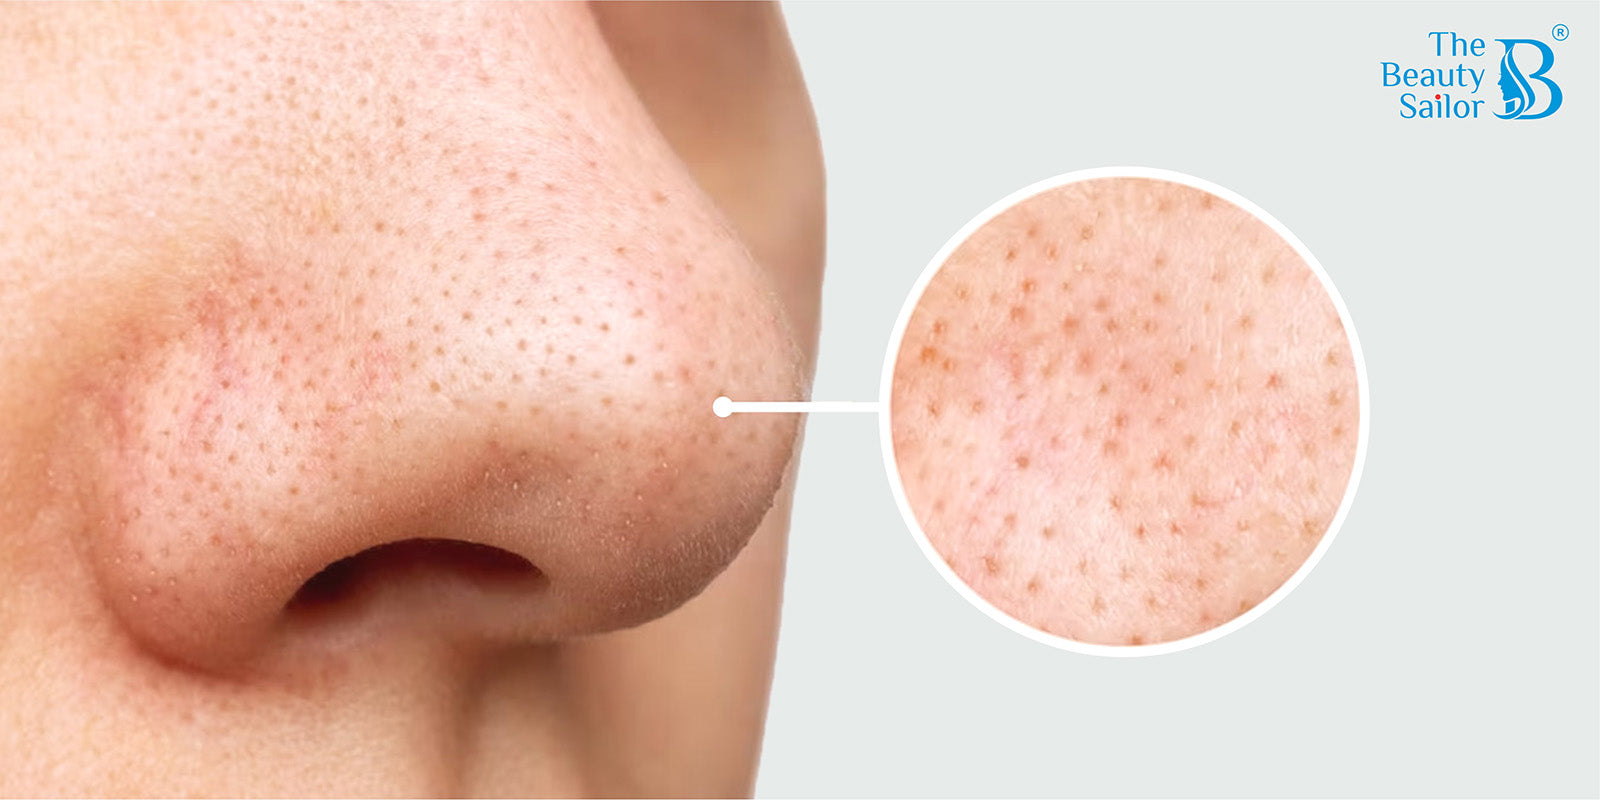 Remove Blackheads And Whiteheads On Nose: Expert Tips